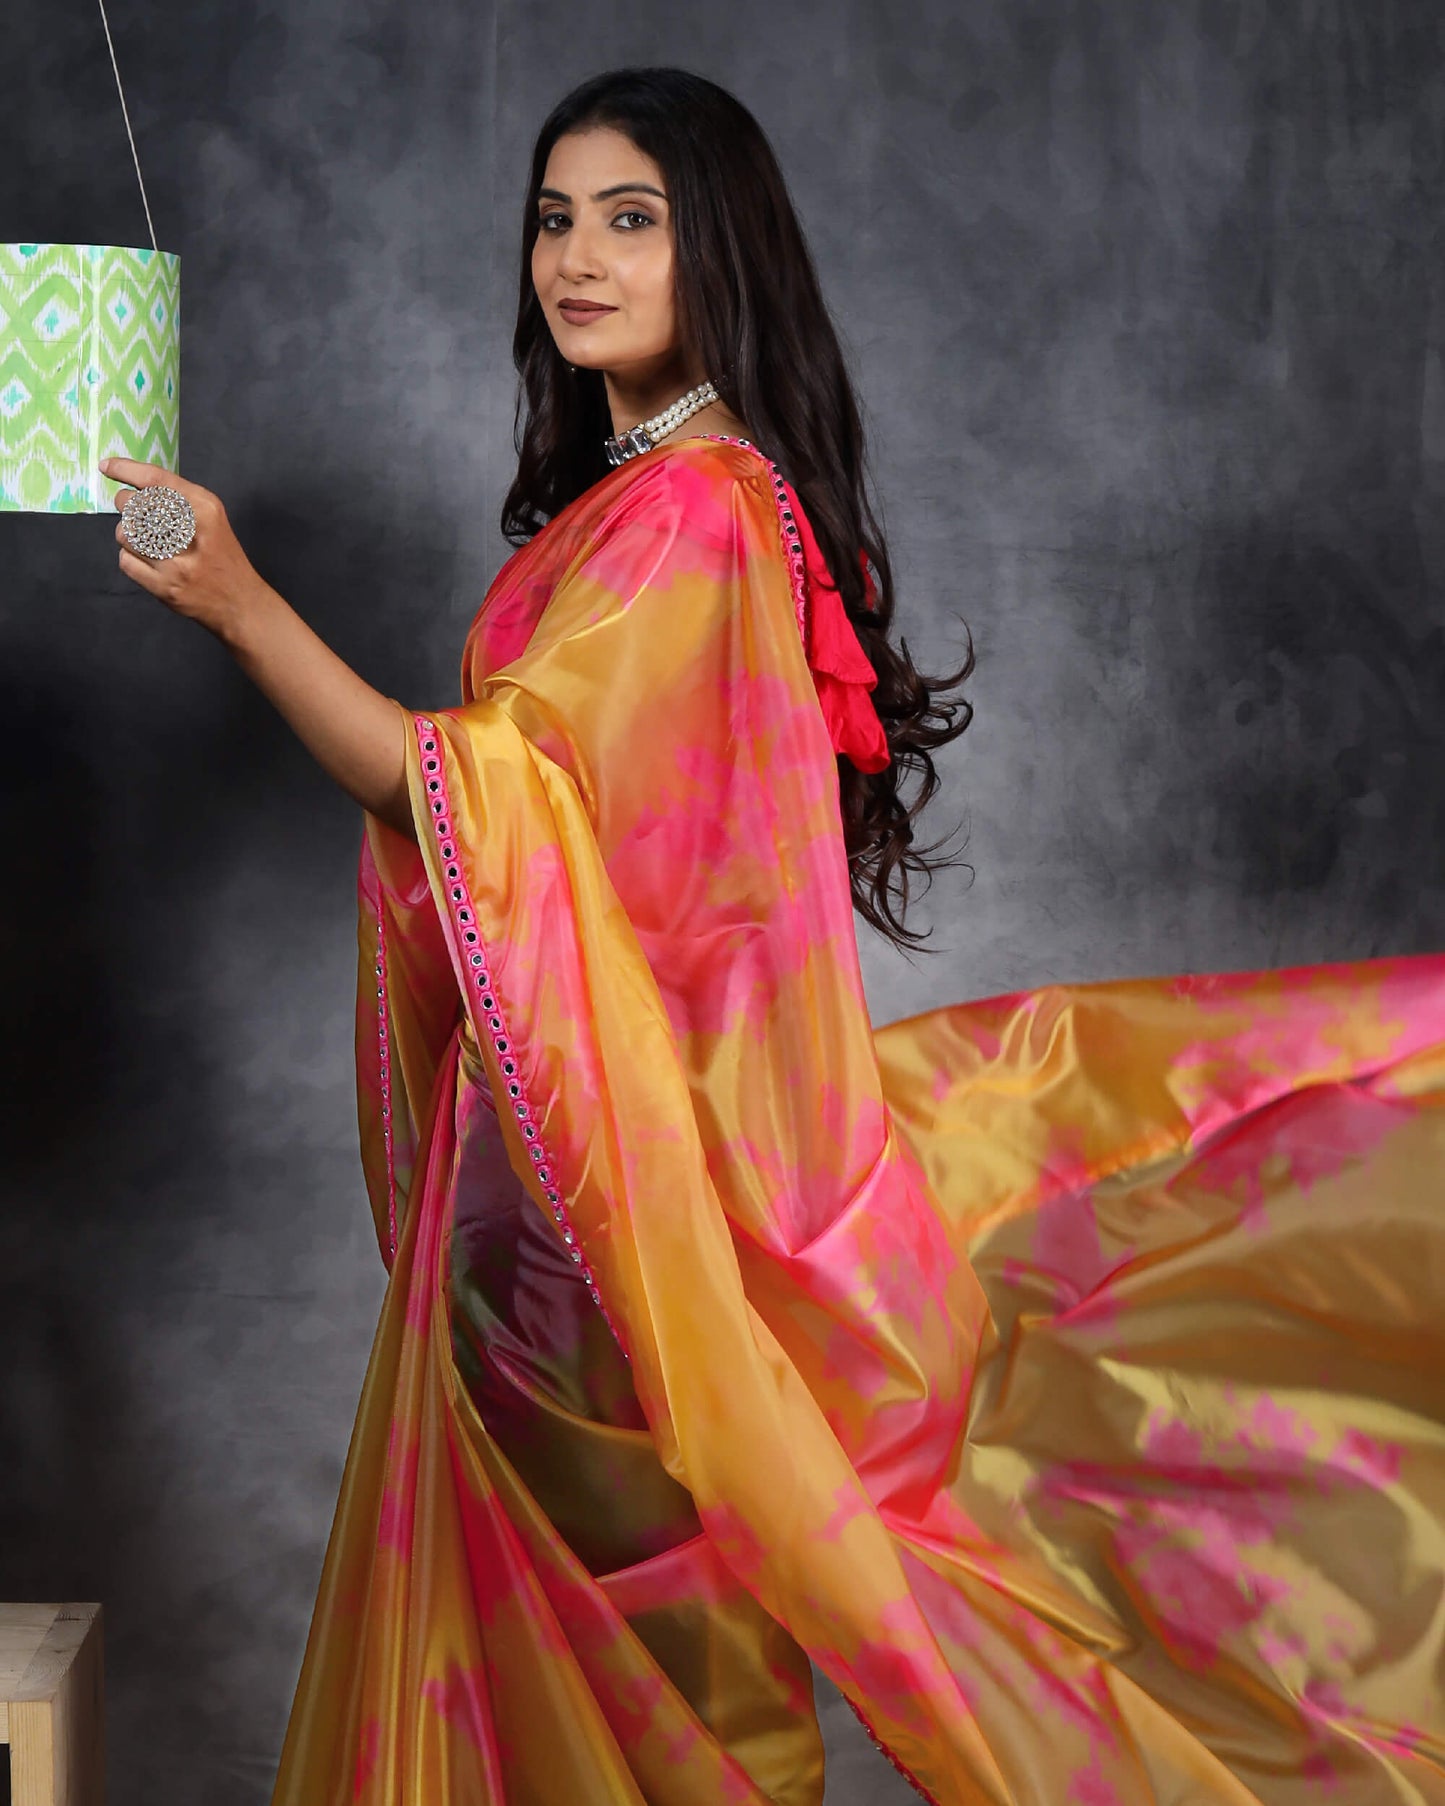 Mustard Yellow And Pink Tie & Dye Pattern Liquid Organza Saree With Mirror Work Lace Border